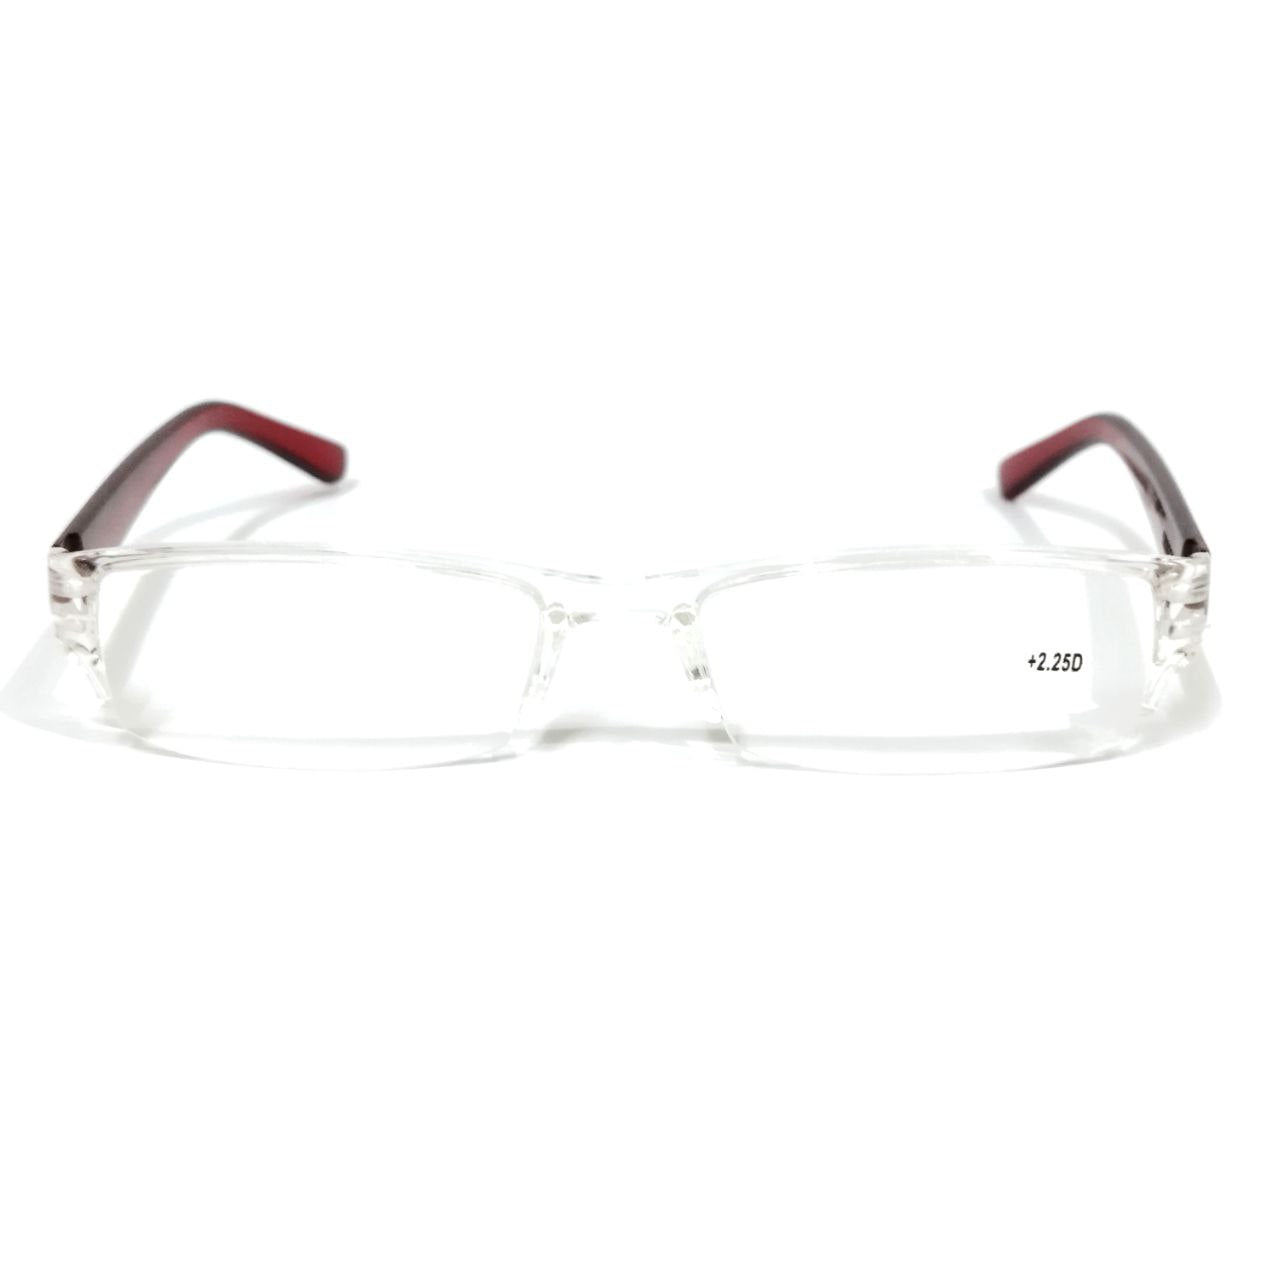 Compact Supra Reading Glasses in Pop Red Color Reading Power +2.25 - Perfect for On-the-Go